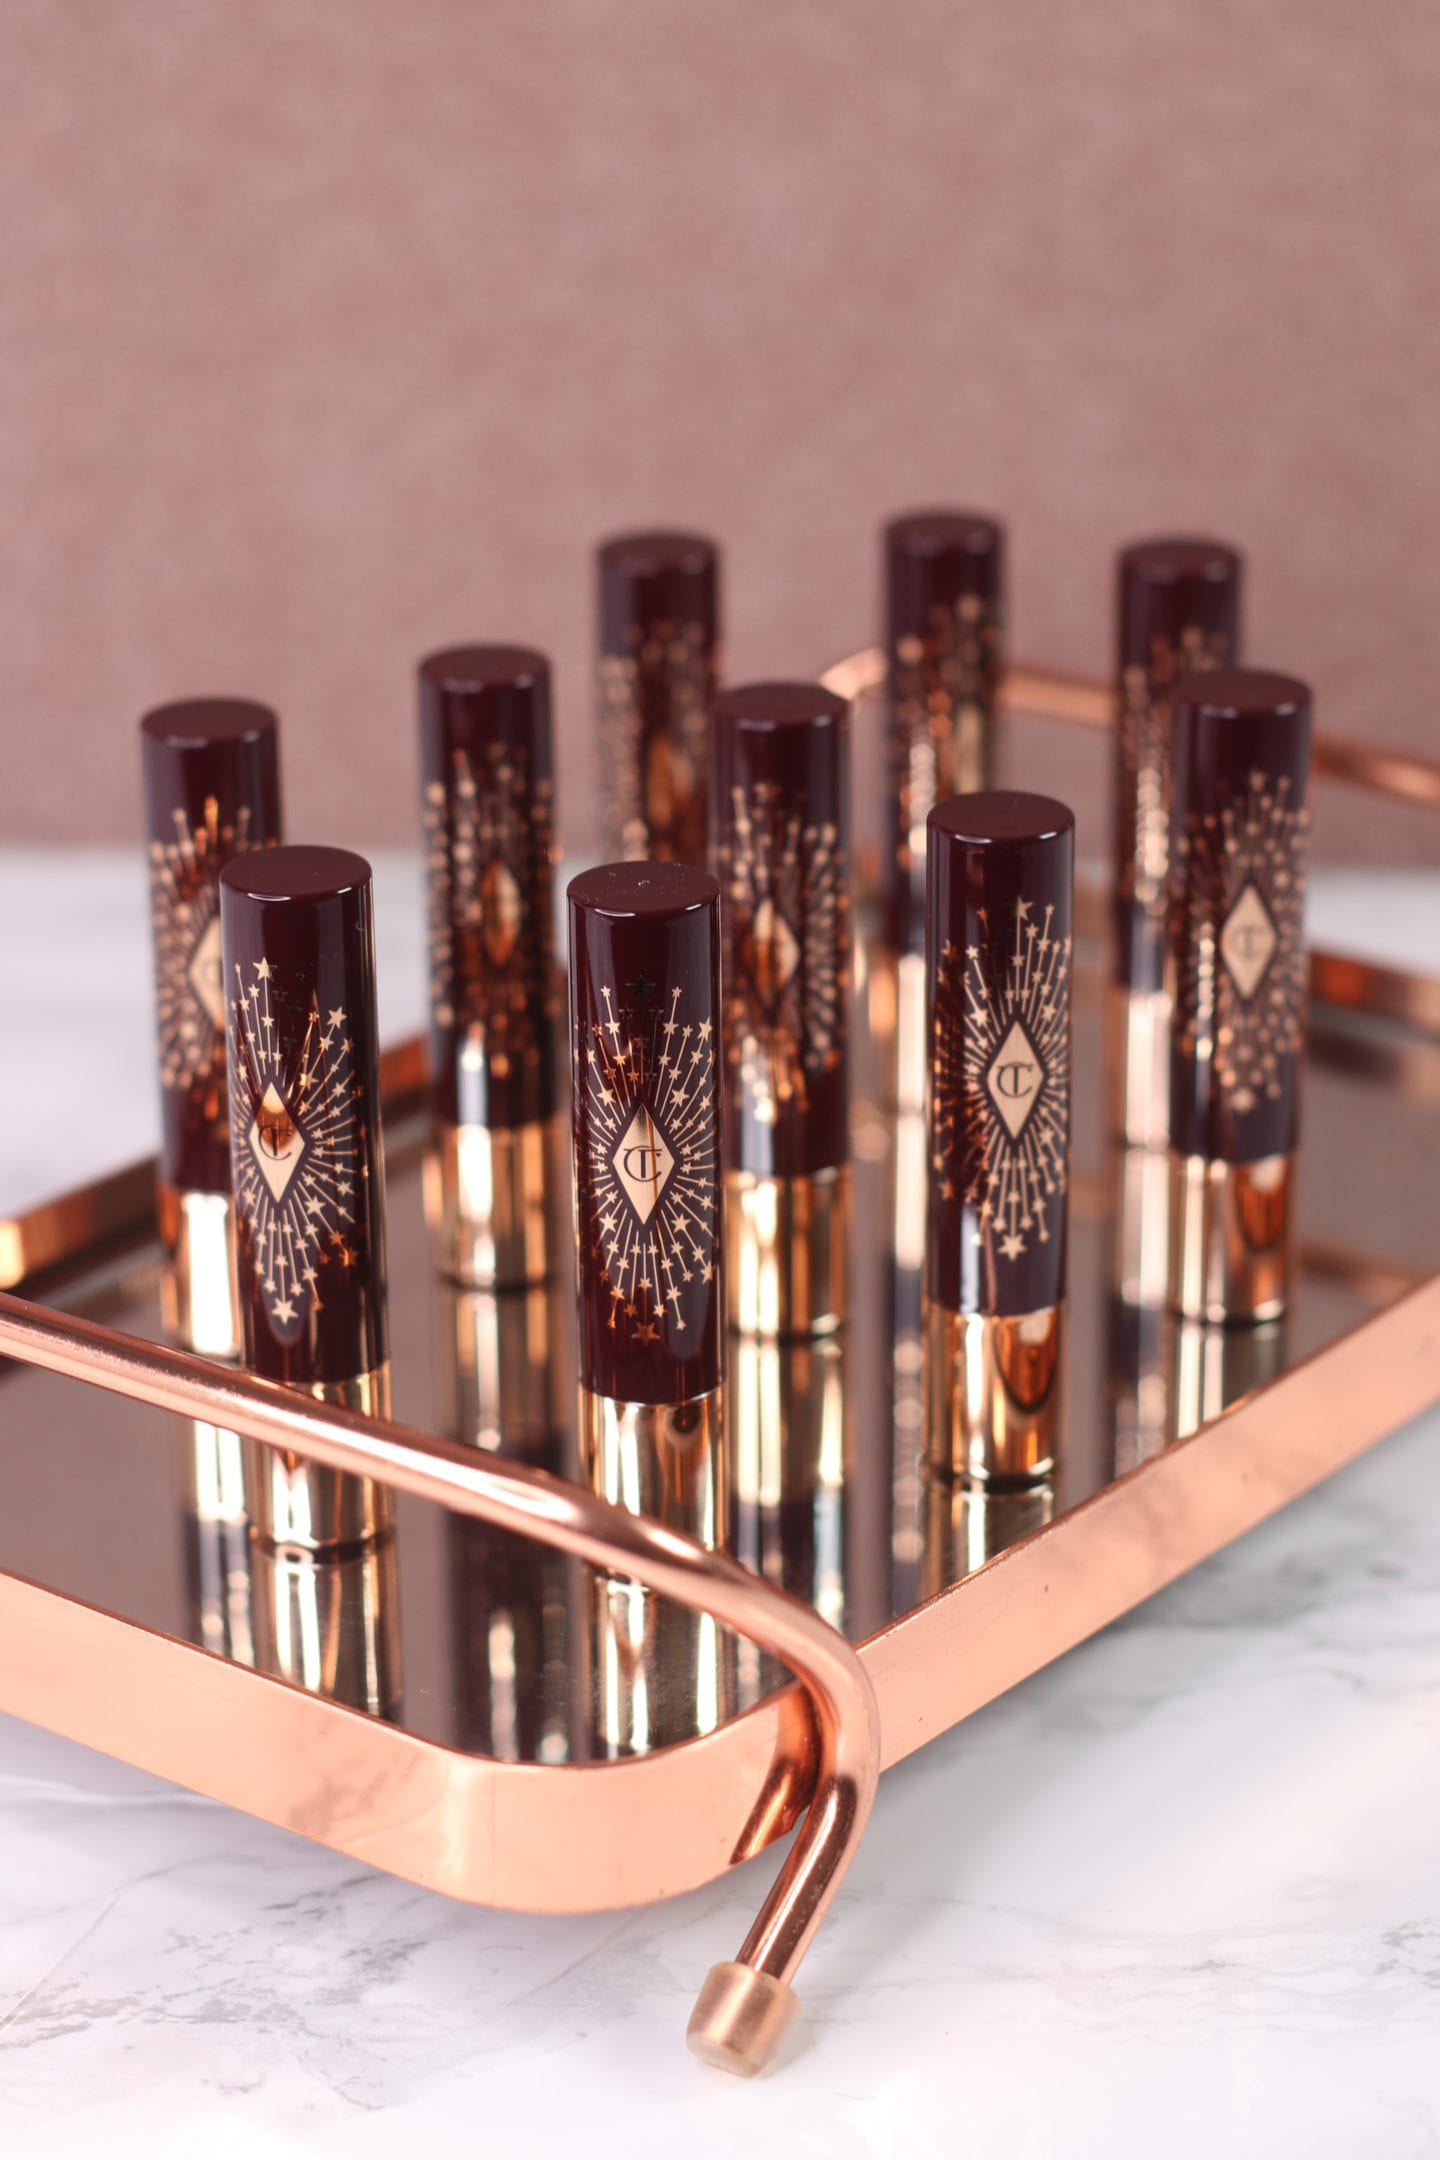 Charlotte Tilbury Hyaluronic Happikiss review, swatches